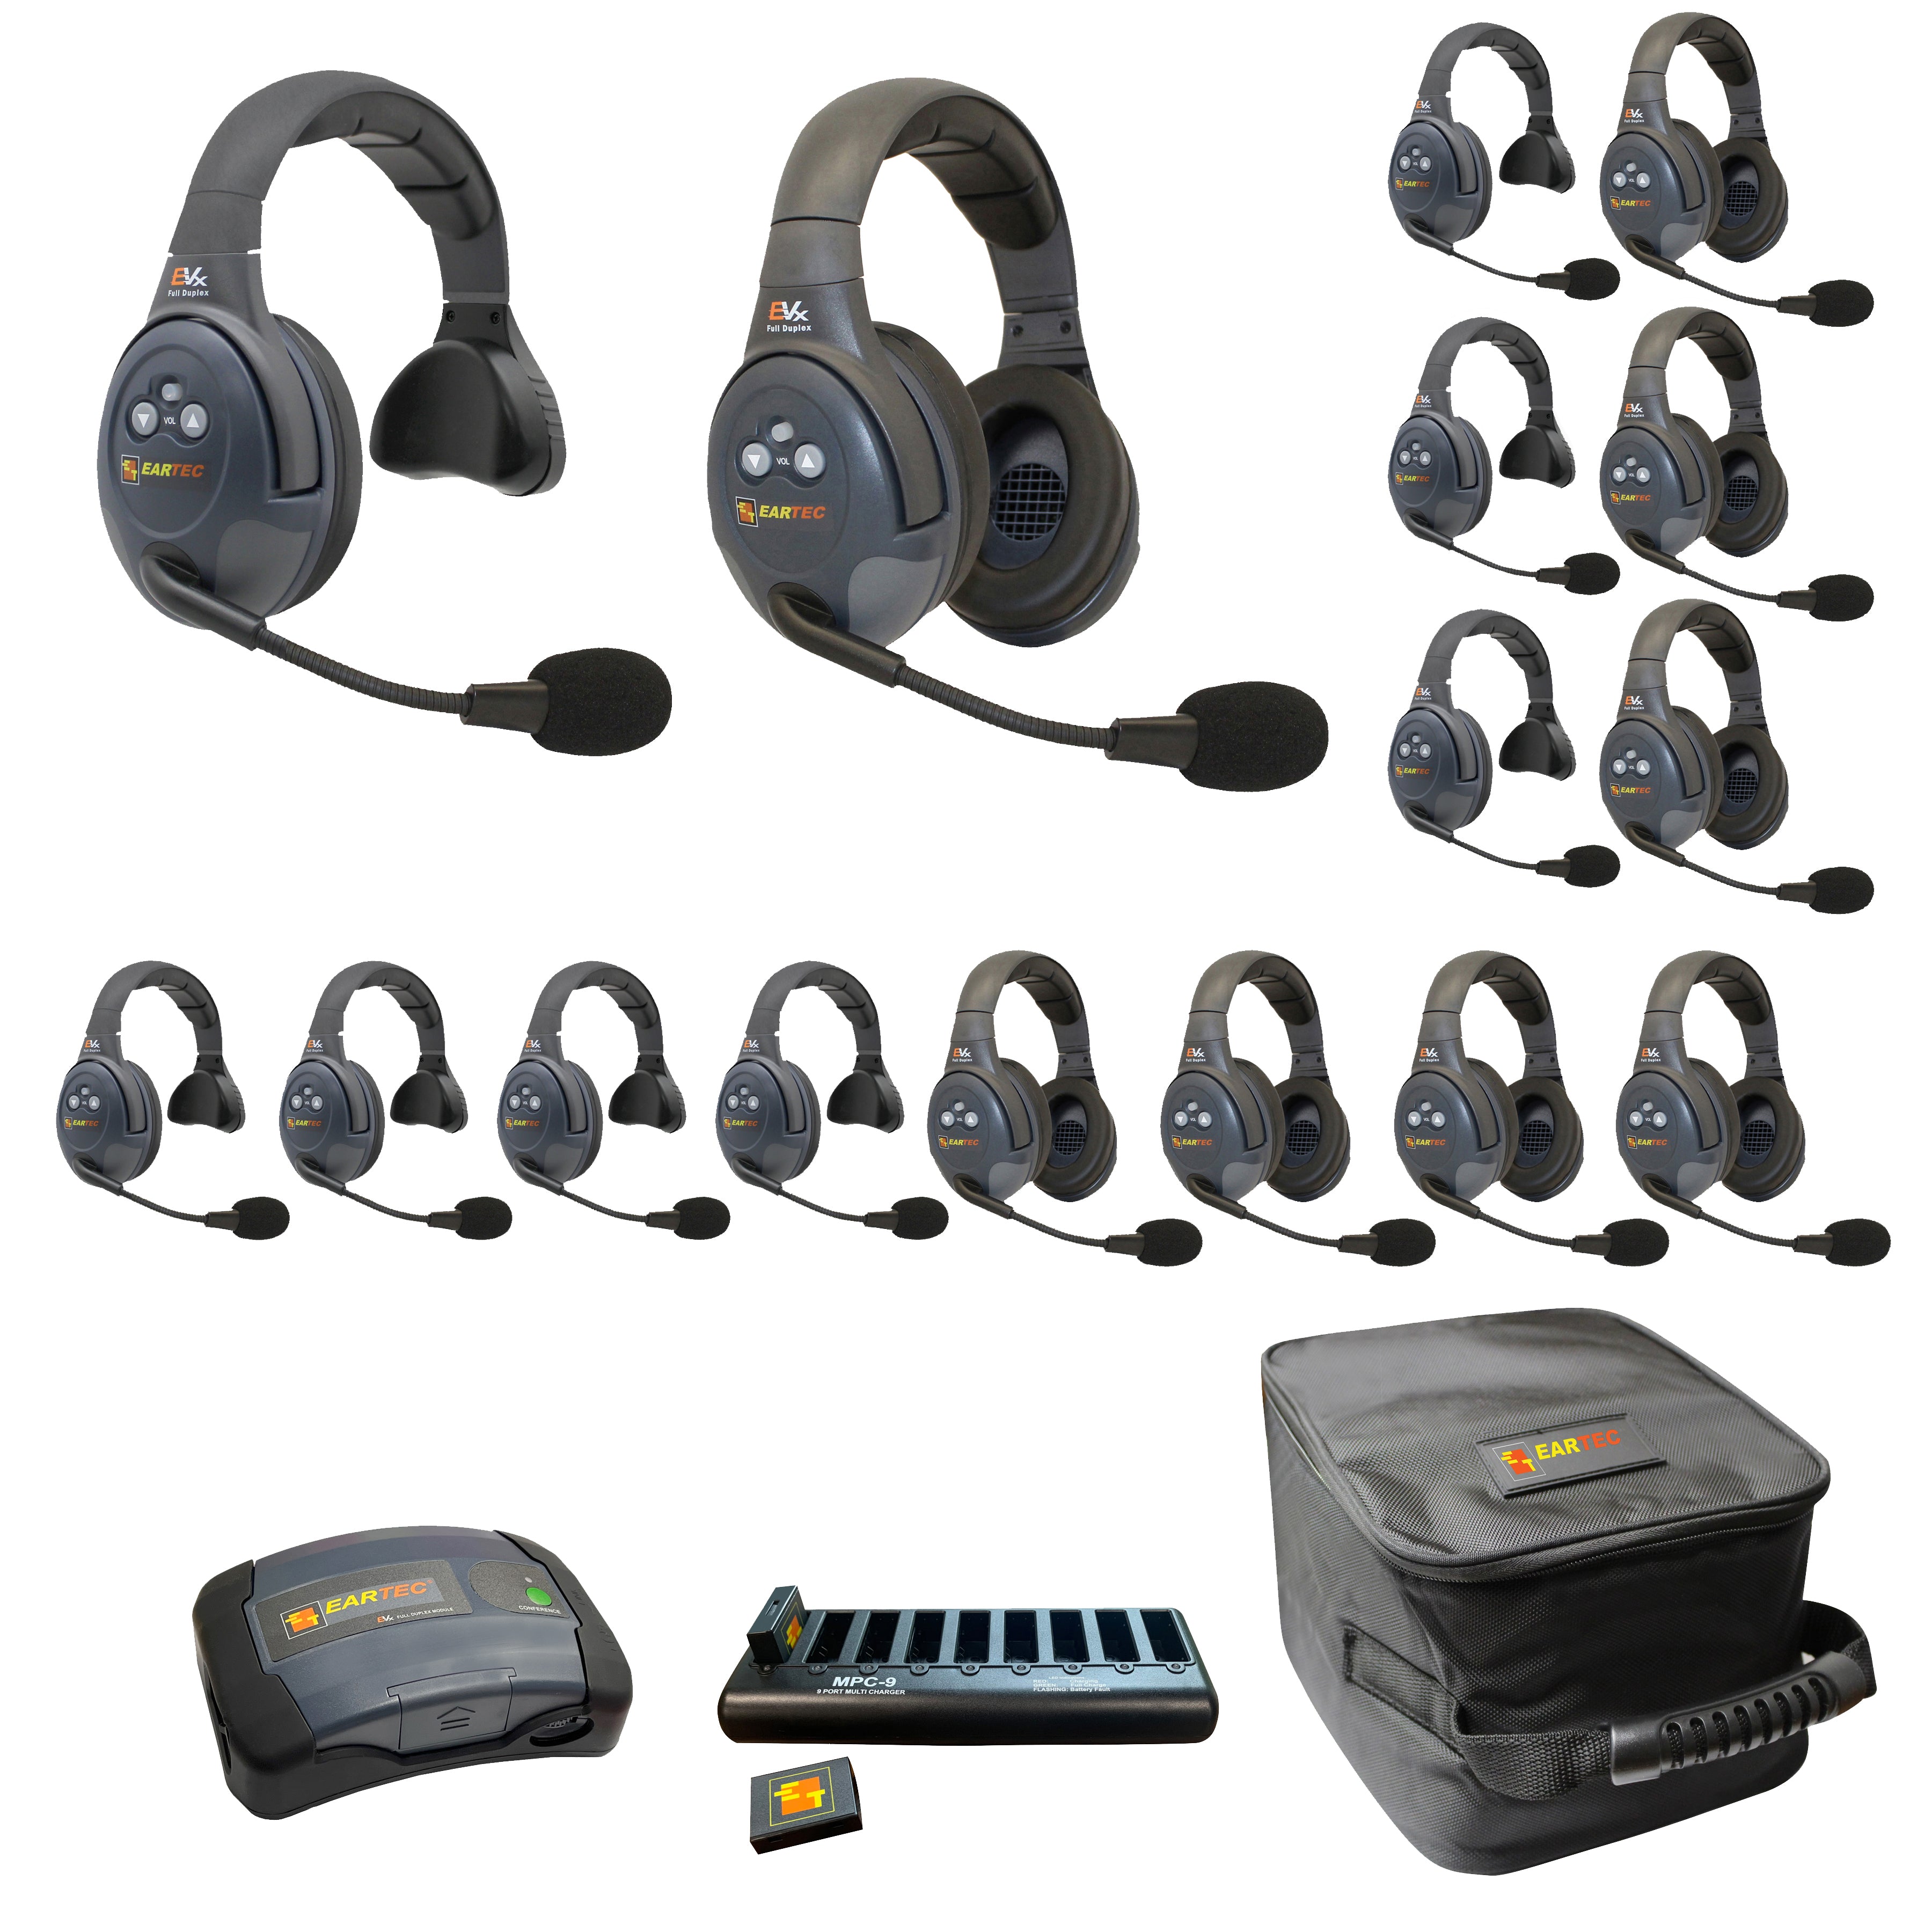 Eartec 1- EVADE C-MOD 2- EVADE Single-Ear Main Headset 8- EVADE Single-Ear Remote Headset 8- EVADE Double-Ear Remote Headsets 2- 9-Port Charger w/ Adapter 2- Extra large Soft Padded Case 16 X Lithium-Polymer Batteries EVX1688-CM